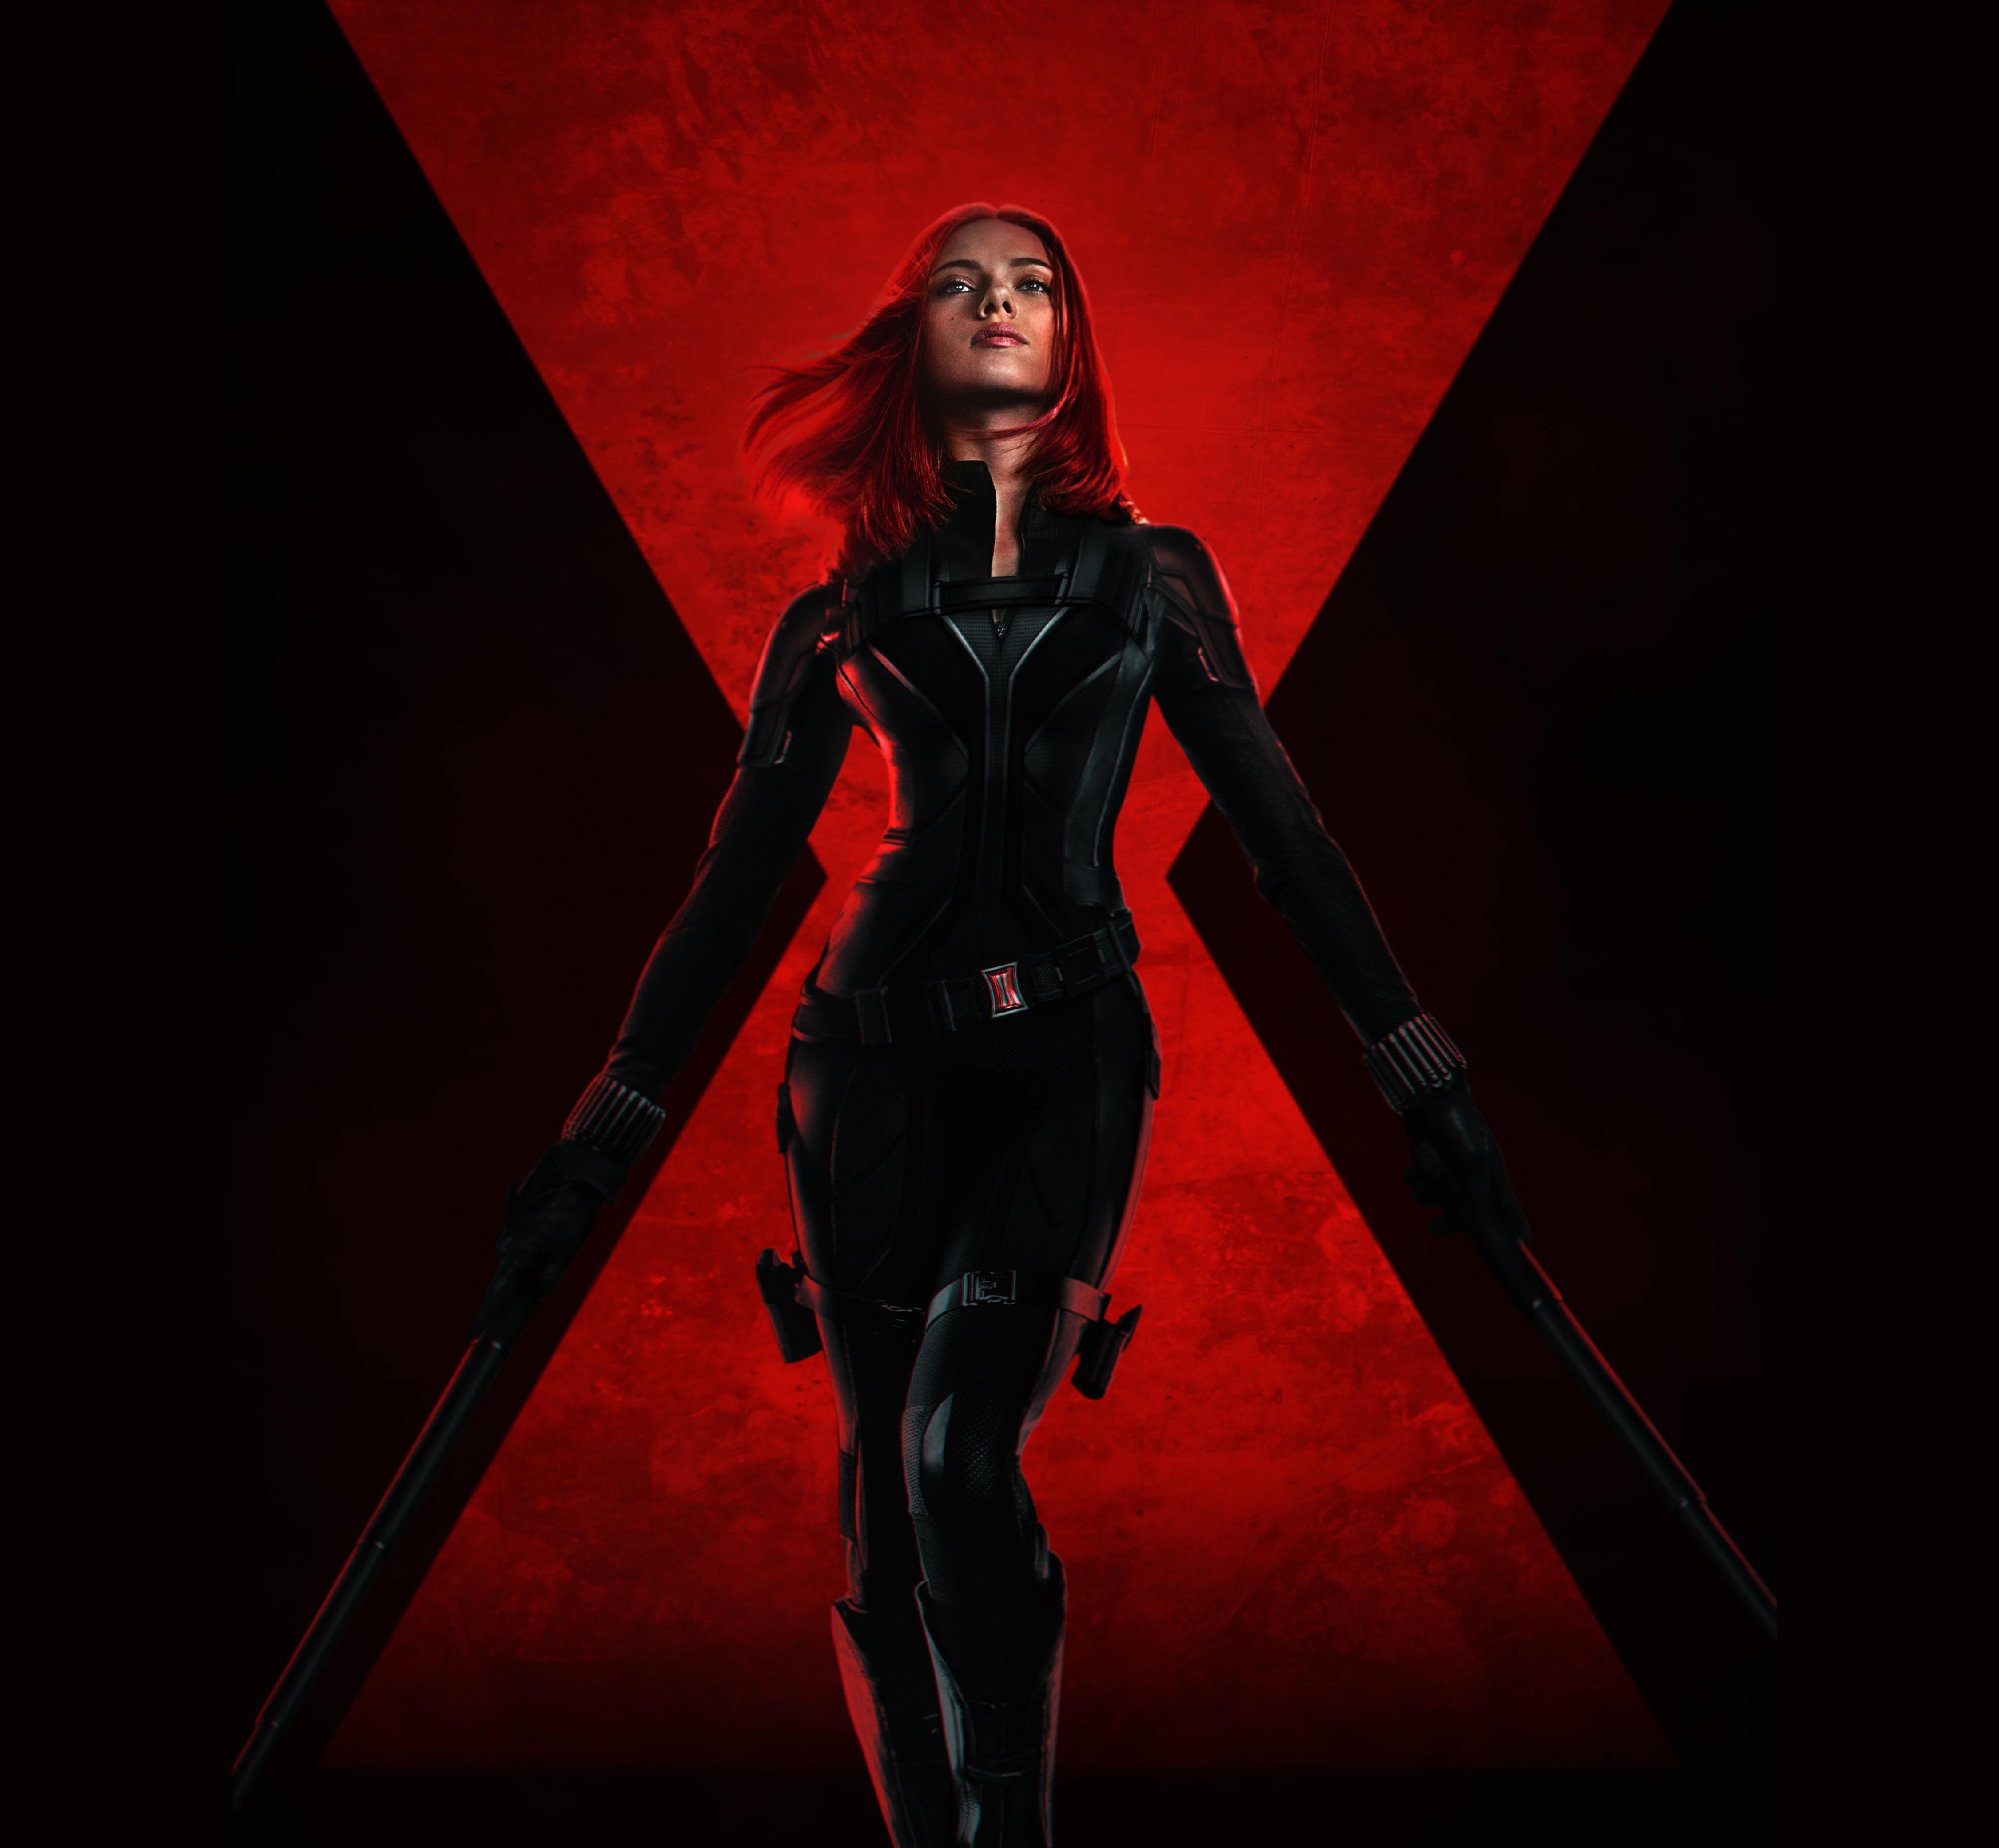 Black Widow 2020 Wallpaper, HD Movies 4K Wallpaper, Image, Photo and Background